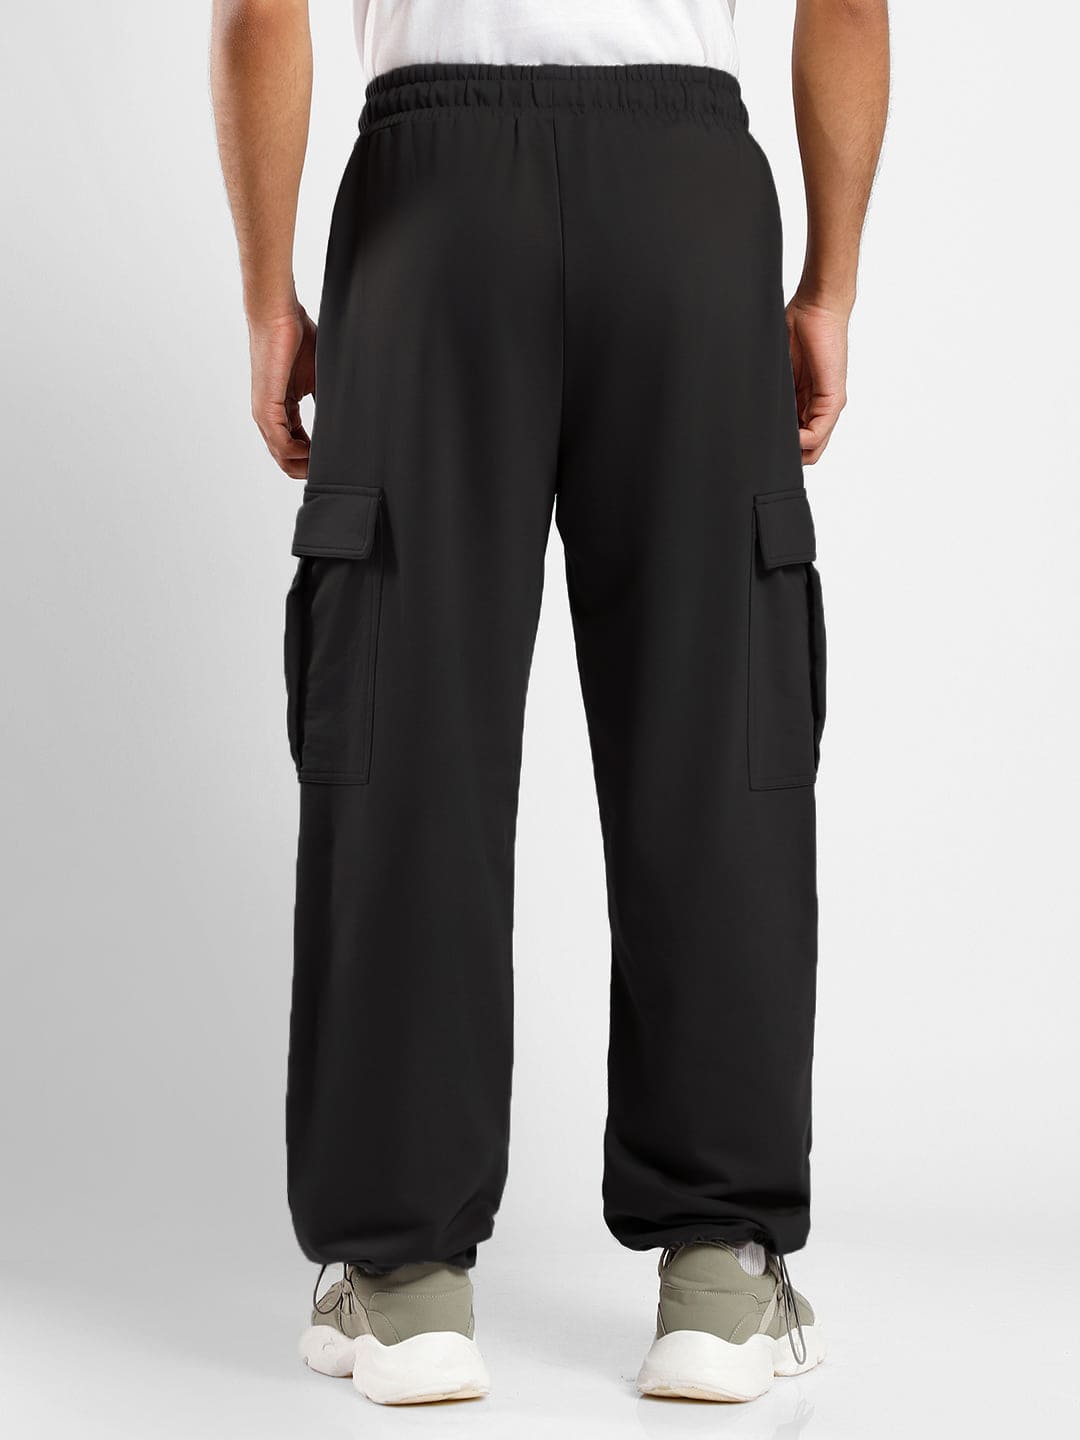 OVERSIZED CARGO PANTS – PACKER SHOES